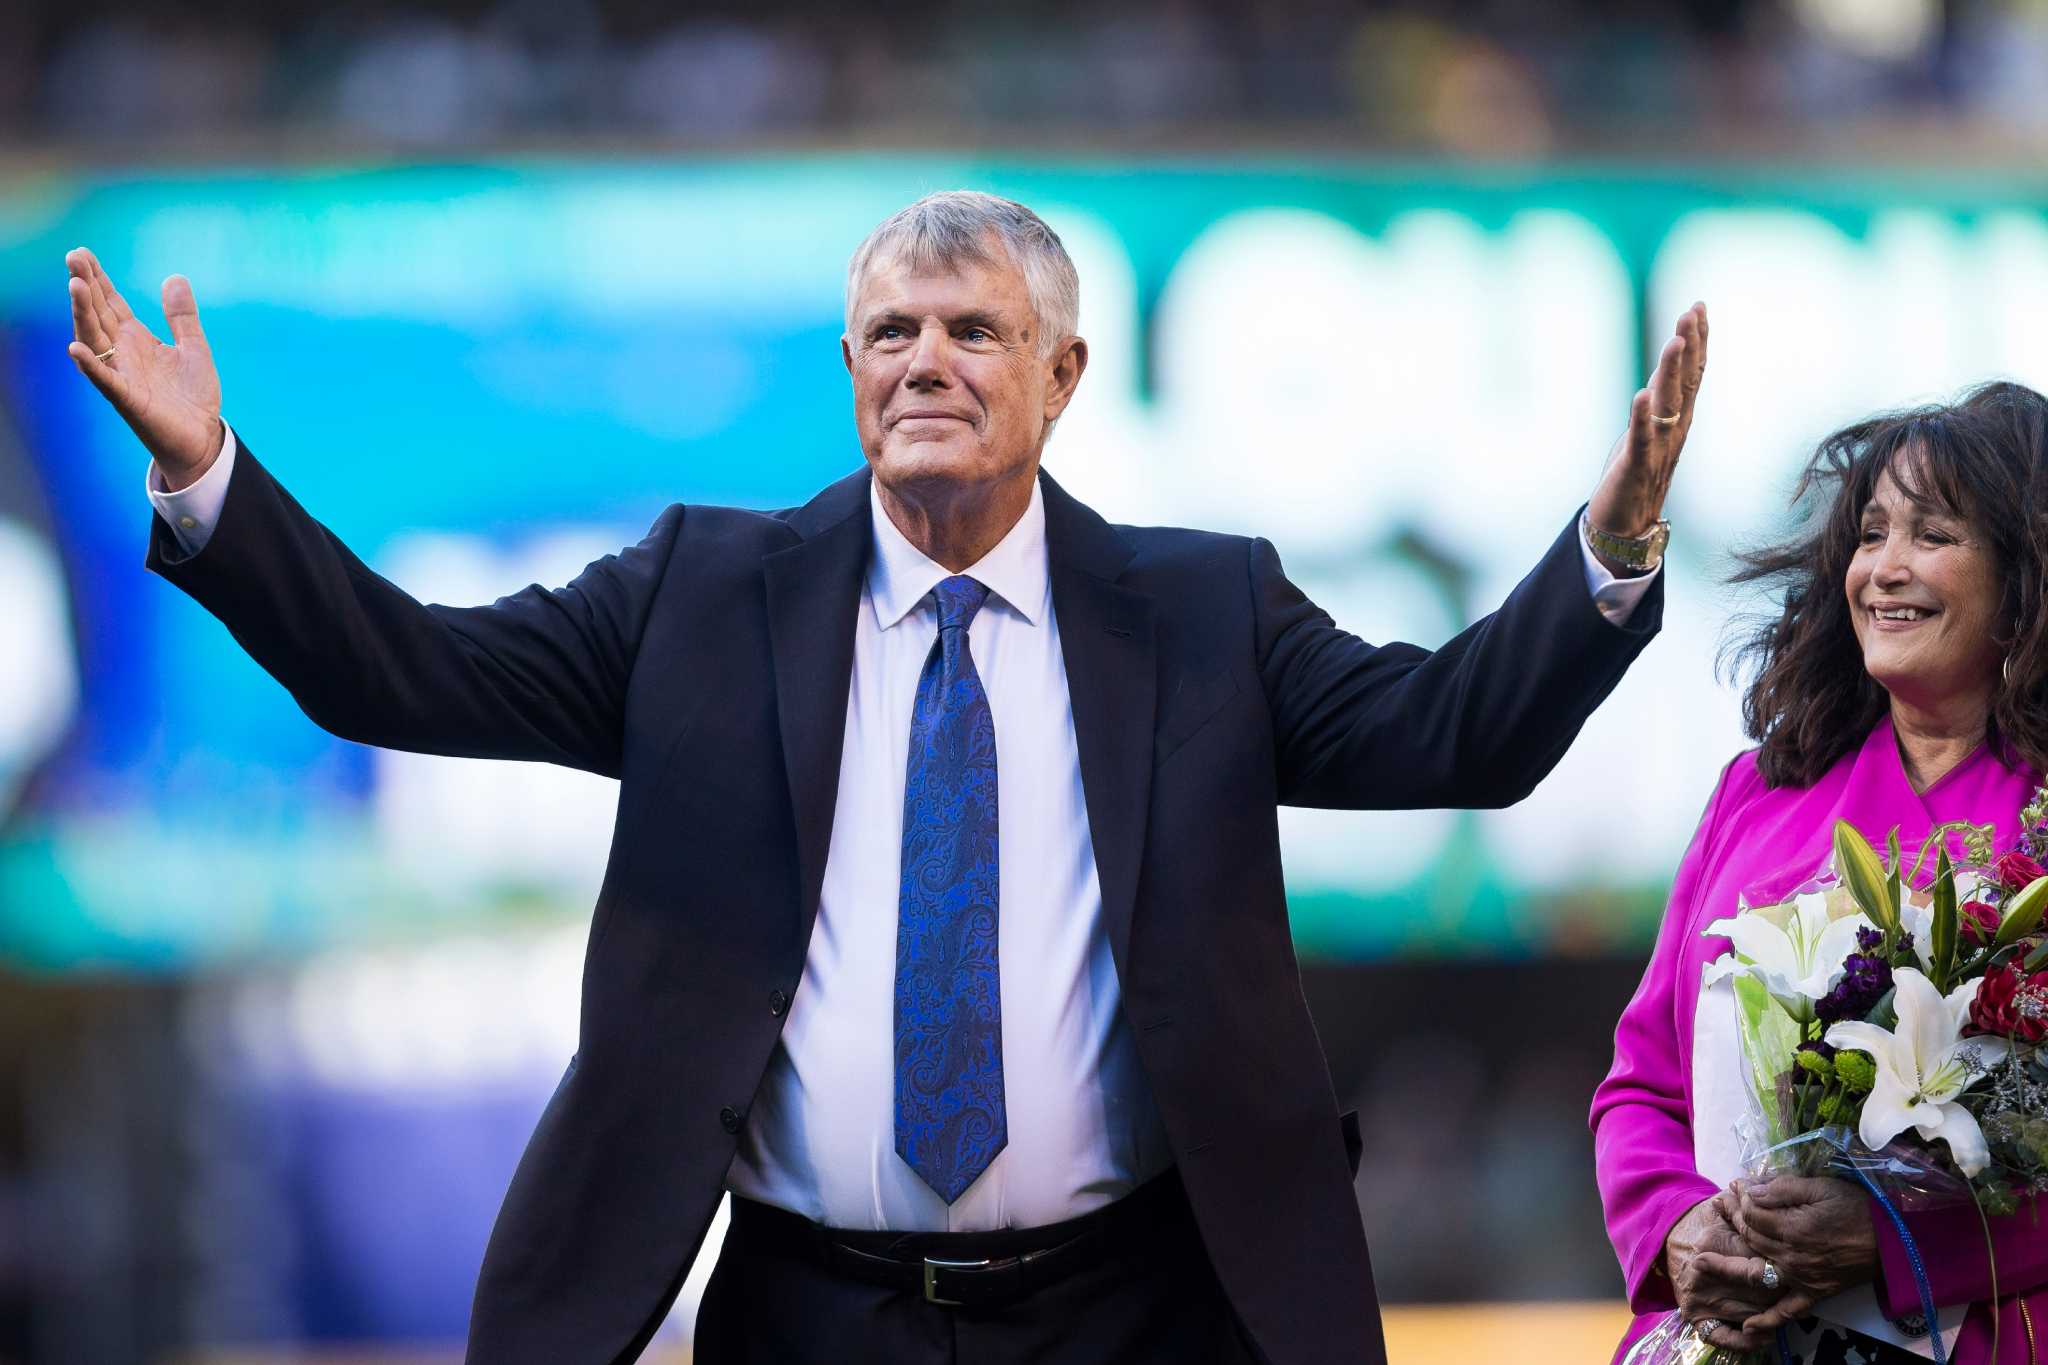 Sweet Lou Piniella headed into Mariners Hall of Fame on Saturday